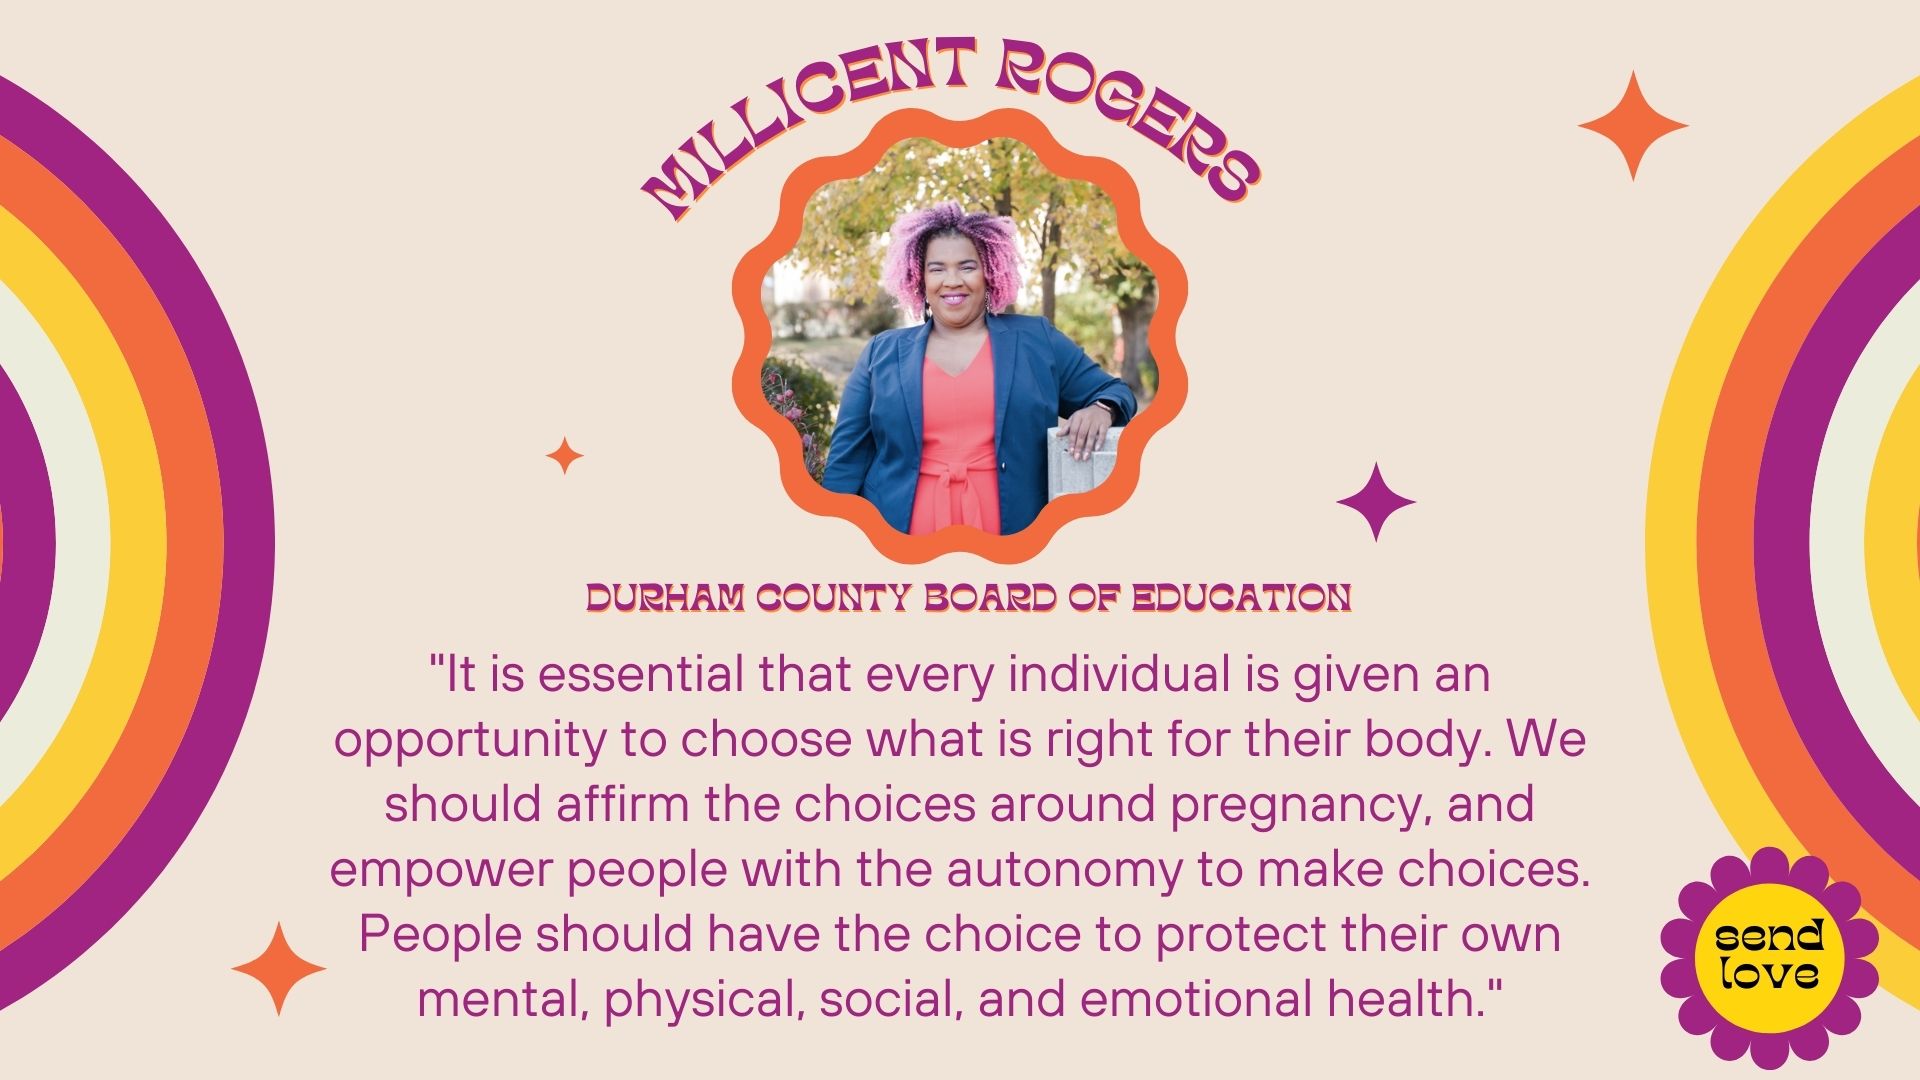 Millicent Rogers: Durham County Board of Education - Consolidated District B. It is essential that every individual is given an opportunity to choose what is right for their body. We should affirm the choices around pregnancy, and empower people with the autonomy to make choices. People should have the choice to protect their own mental, physical, social, and emotional health. We all need options that give us the opportunity to keep ourselves from harm, poverty, struggles, and all the other things that come from unwanted and surprise pregnancies. 